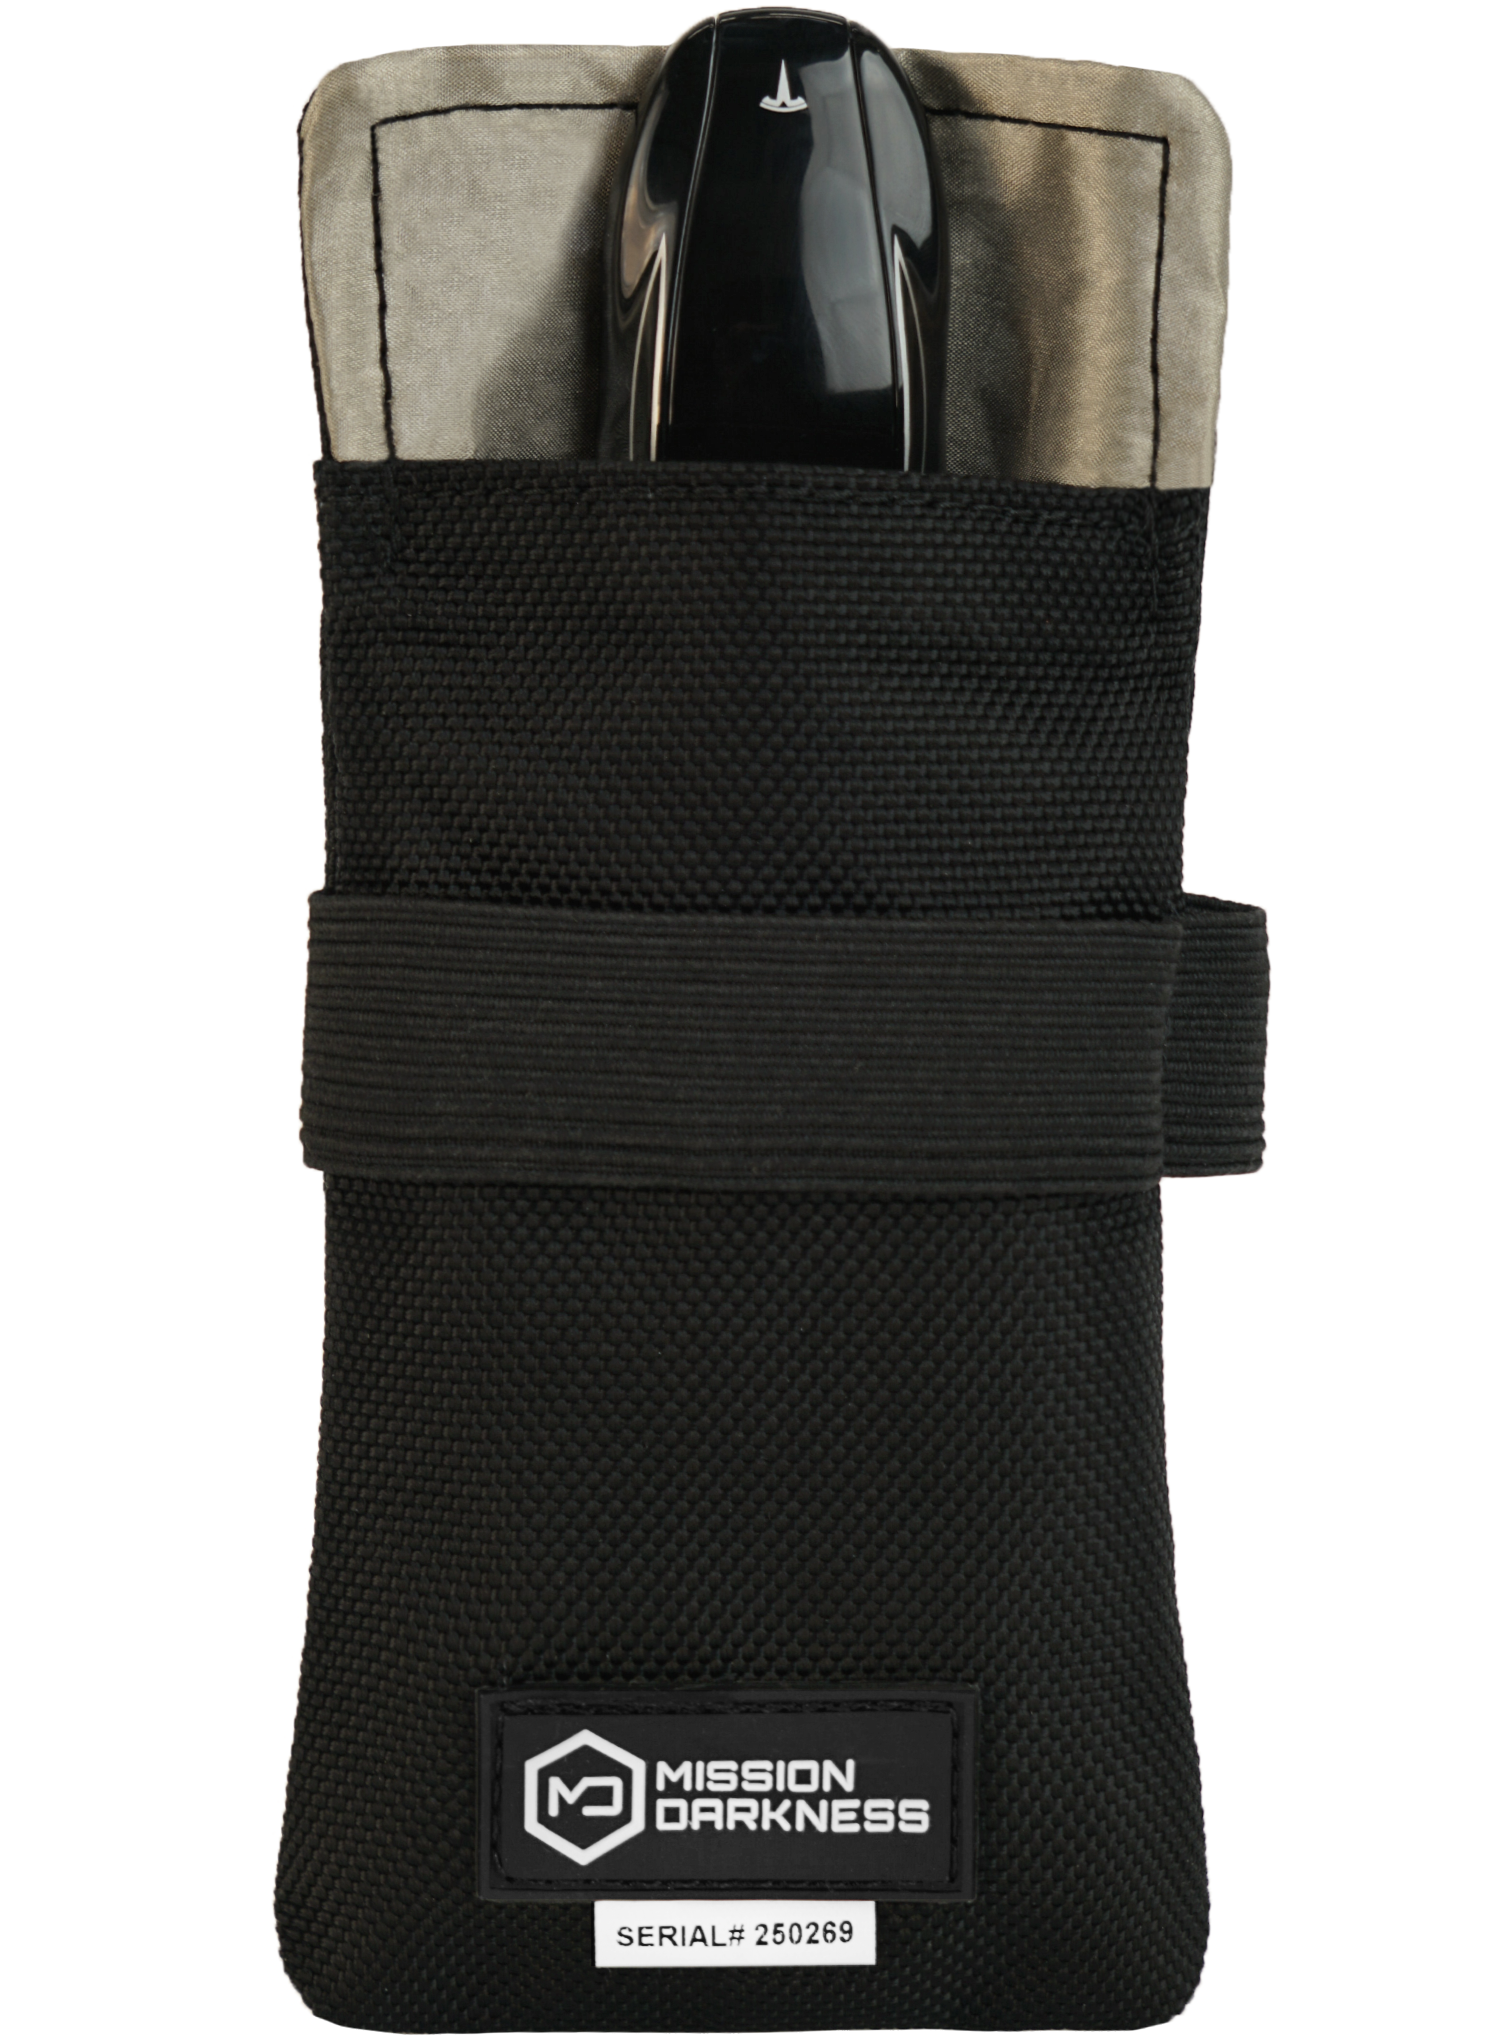 Mission Darkness Faraday Bag for Keyfobs // Device Shielding for Smart Always on